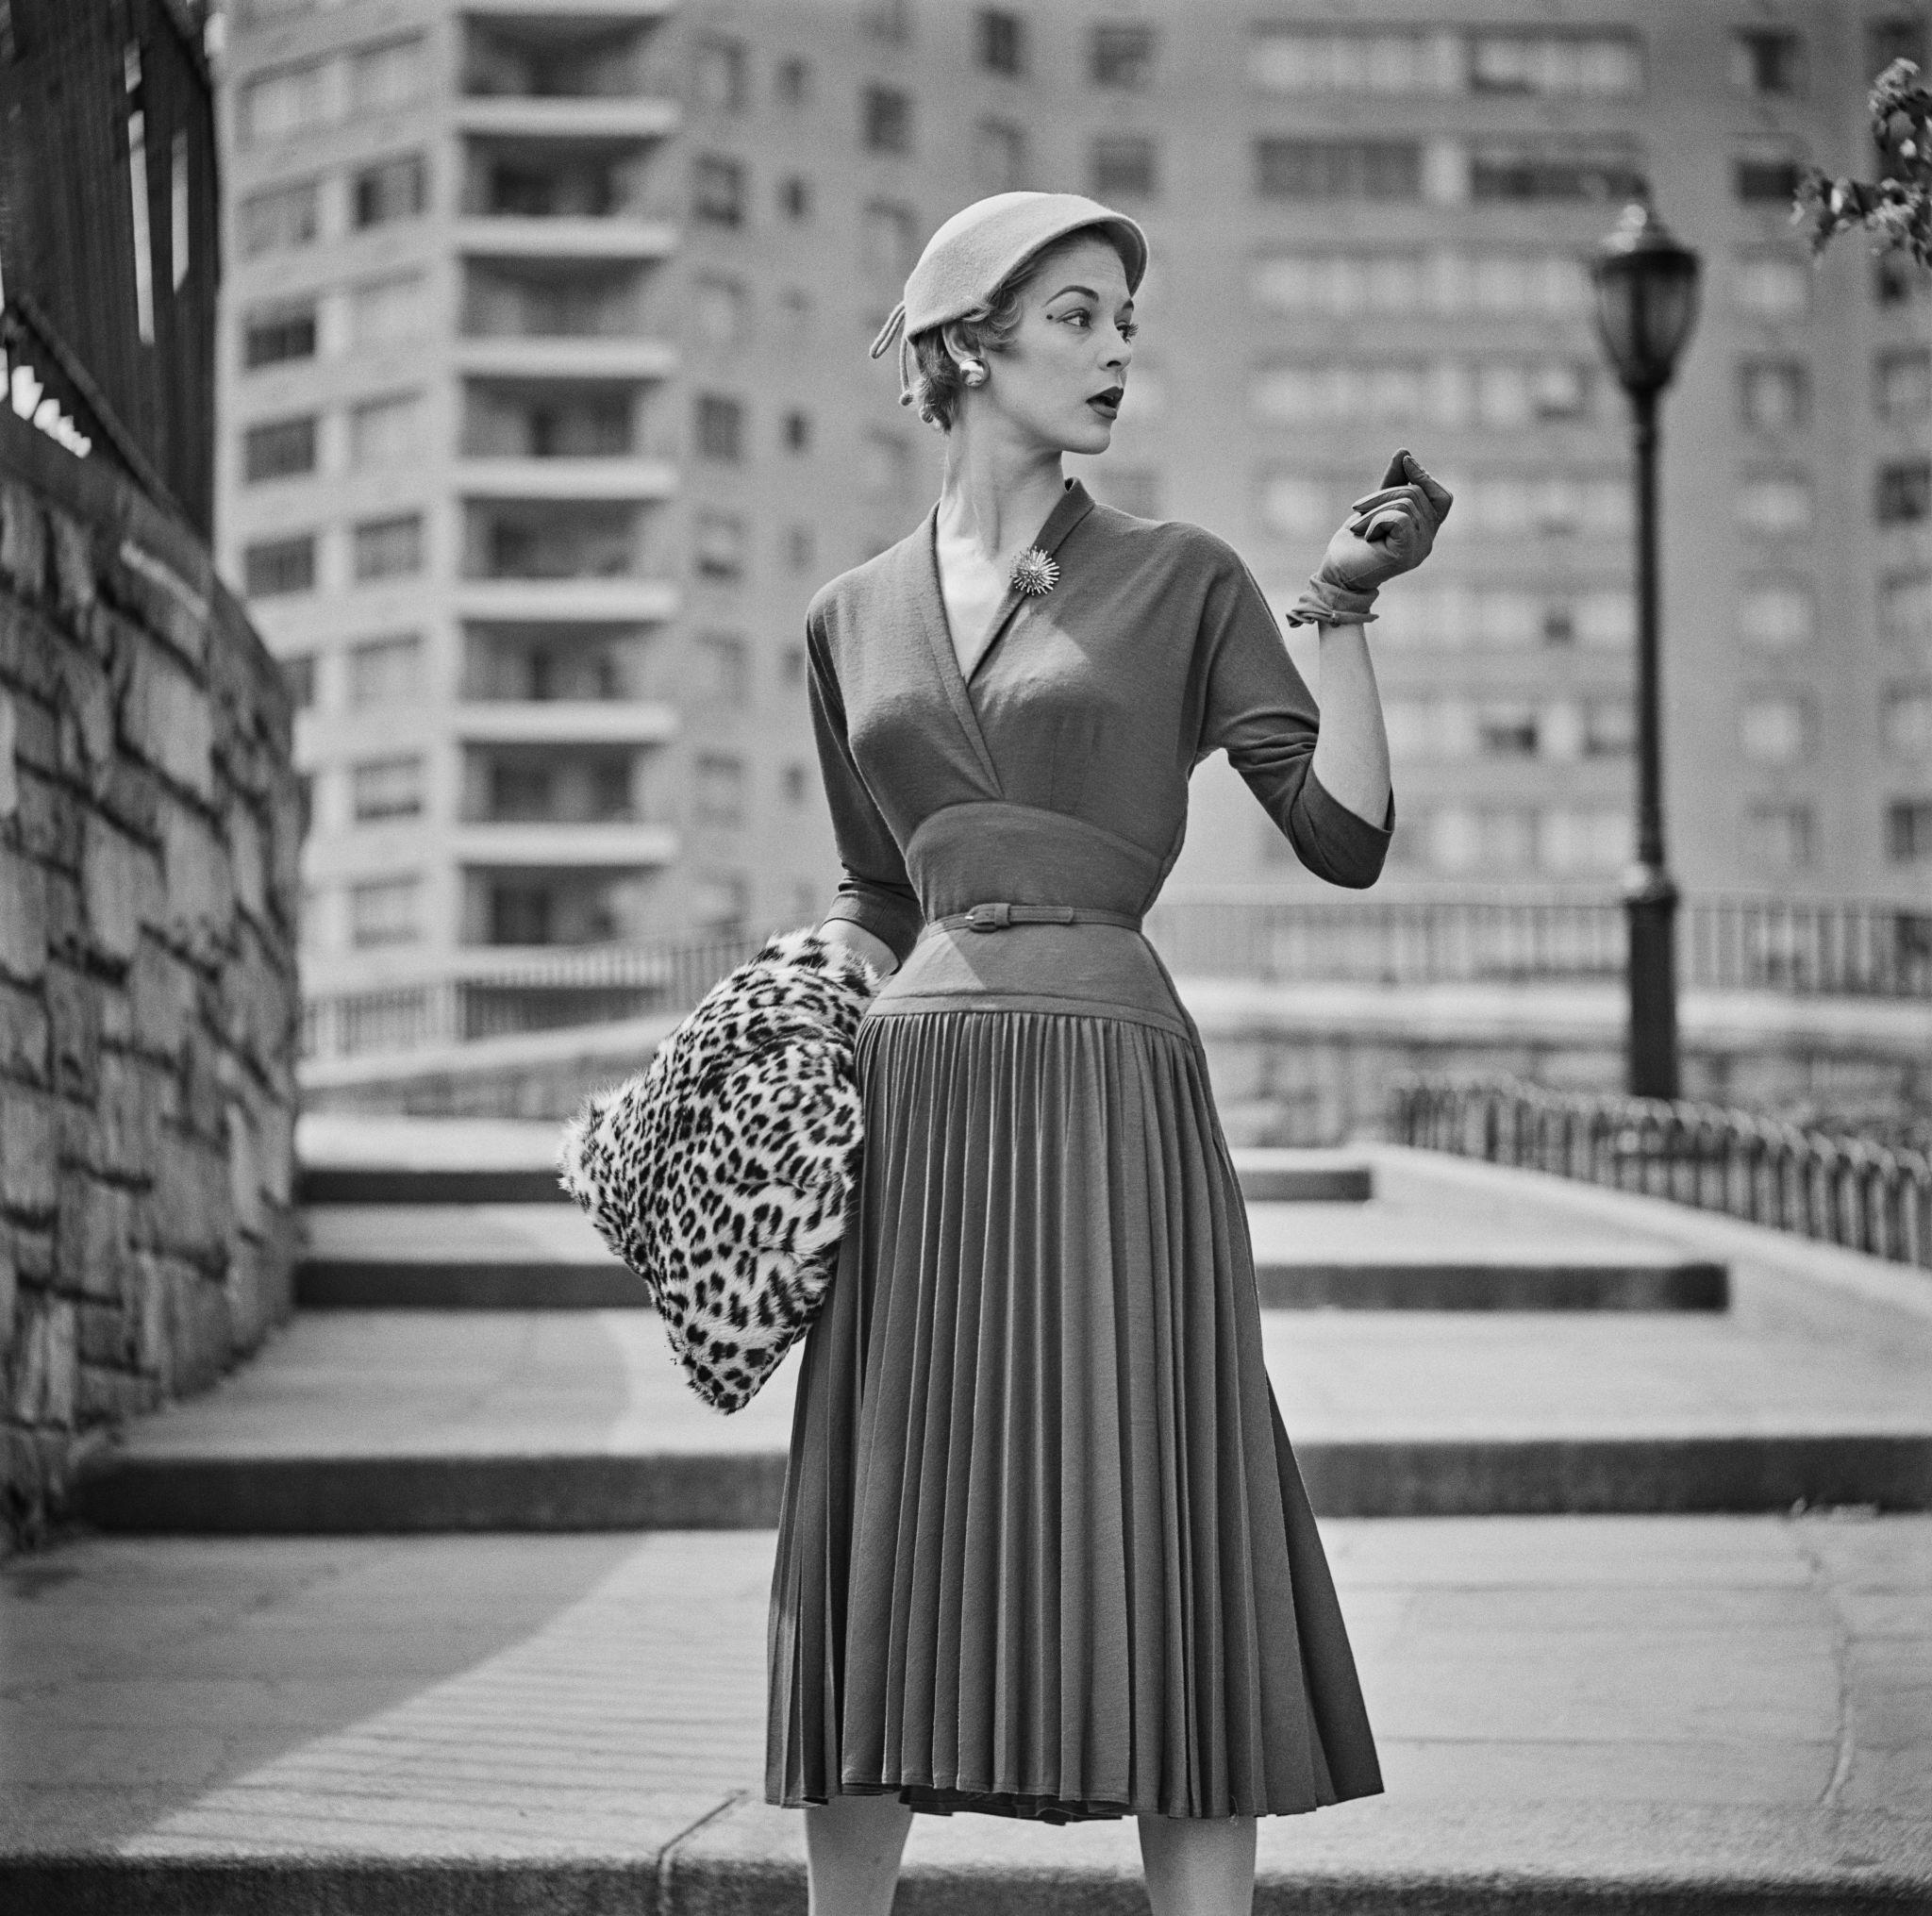 Slim Aarons
Jean Patchett For Saks Fifth Avenue
Silver gelatin print
estate signature stamped edition of 150 
with certificate of authenticity

American model Jean Patchett wearing an outfit by Saks Fifth Avenue, circa 1955. Patchett was one of the